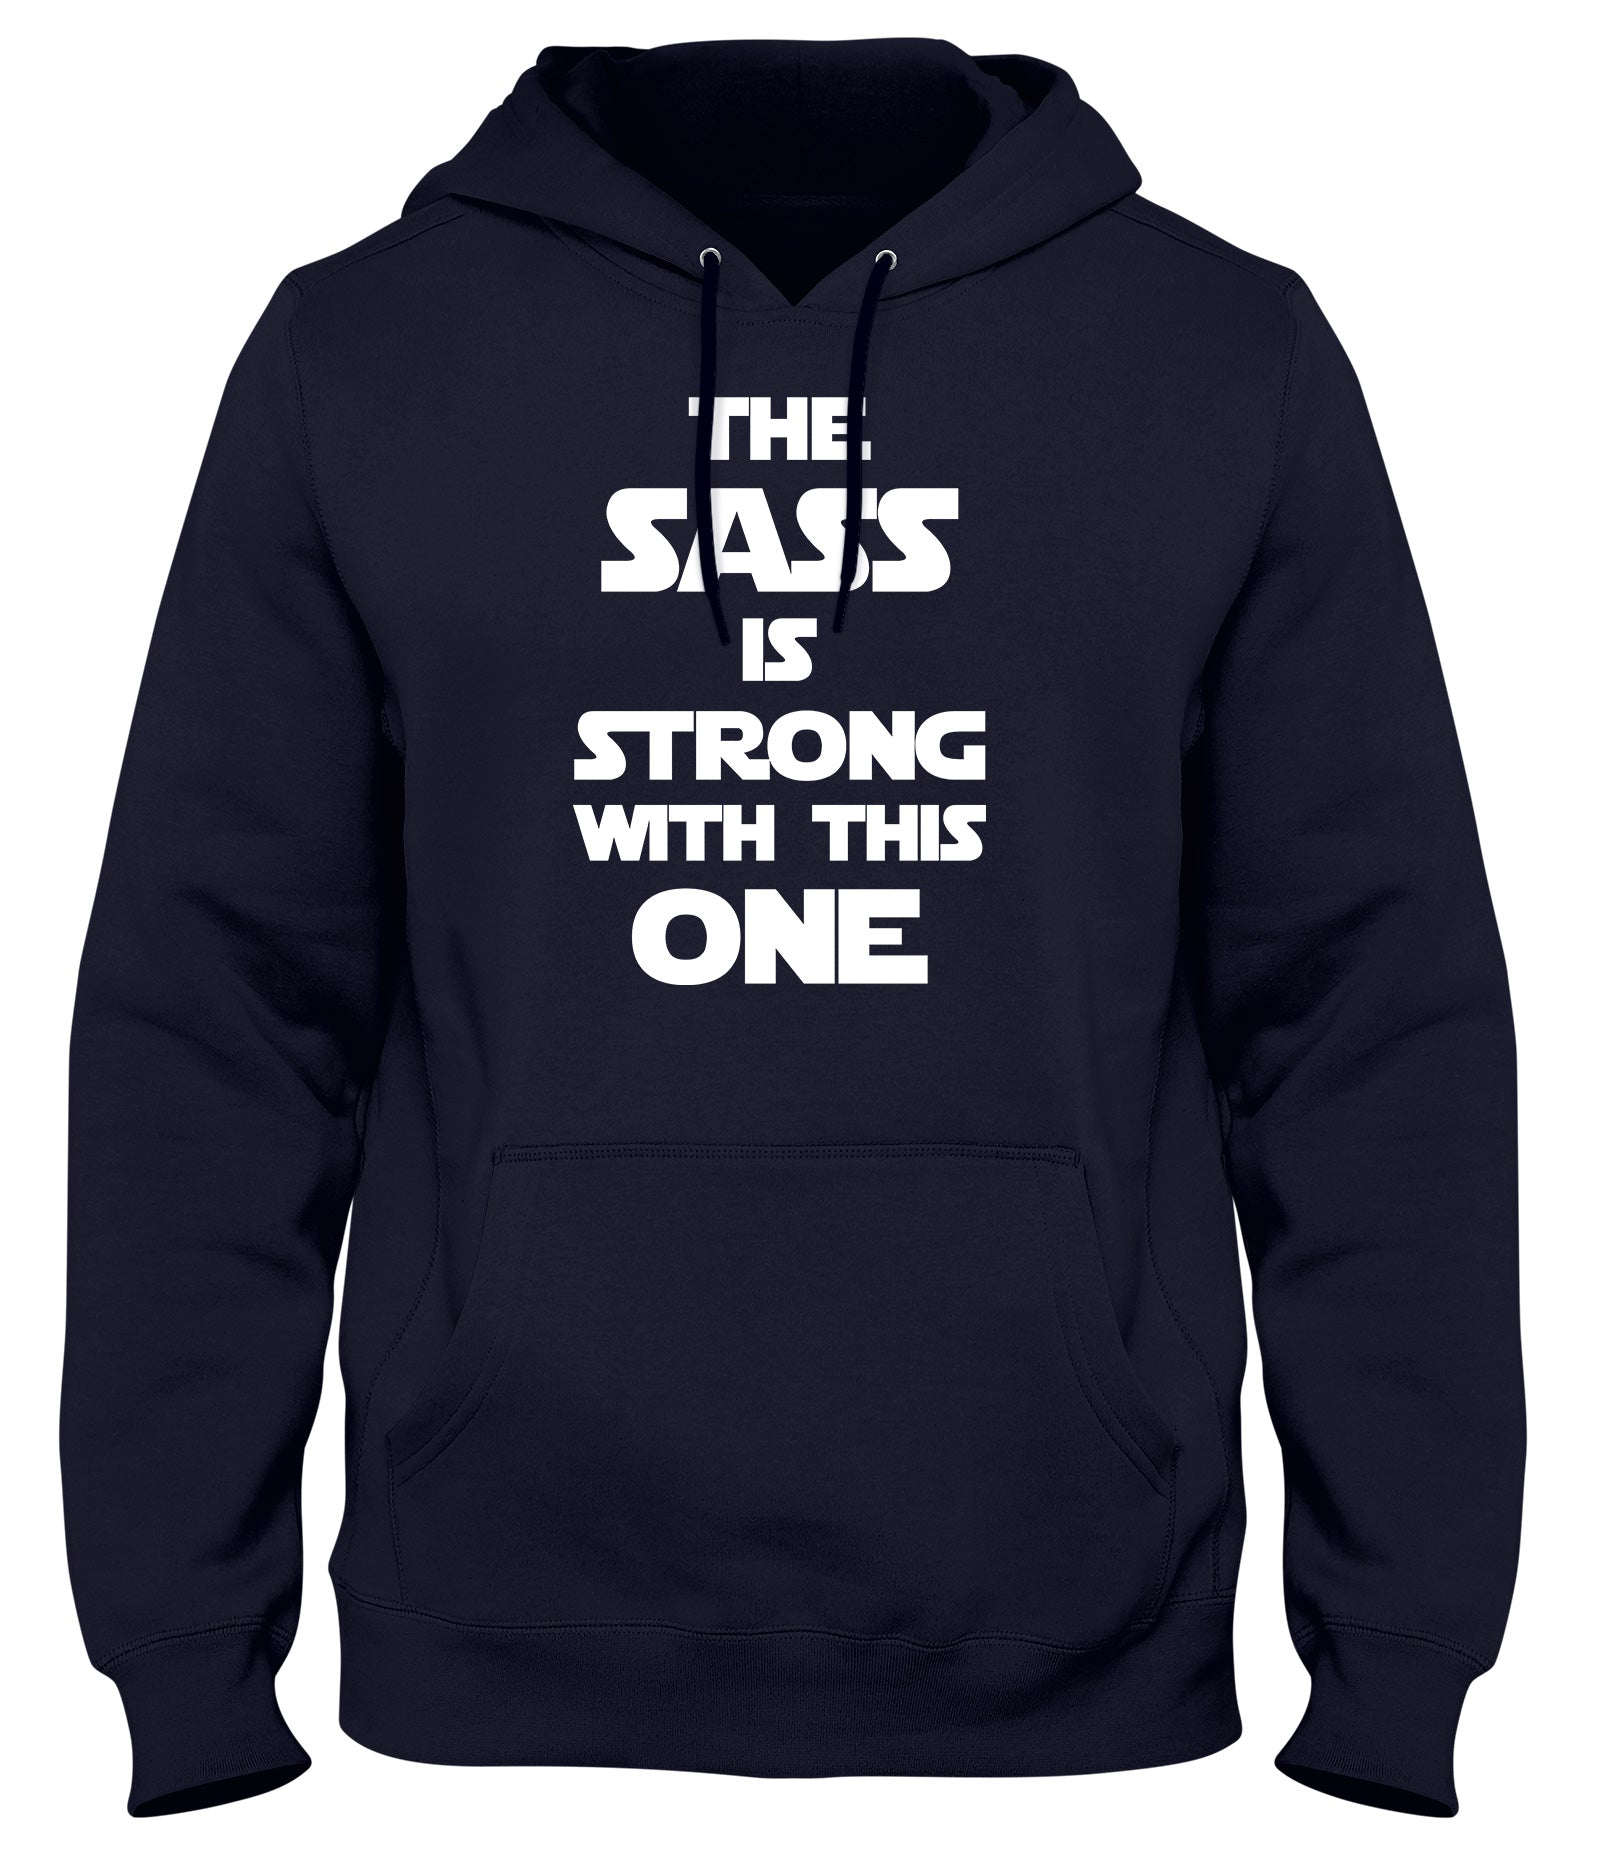 THE SASS IS STRONG WITH THIS ONE MENS LADIES WOMENS UNISEX HOODIE